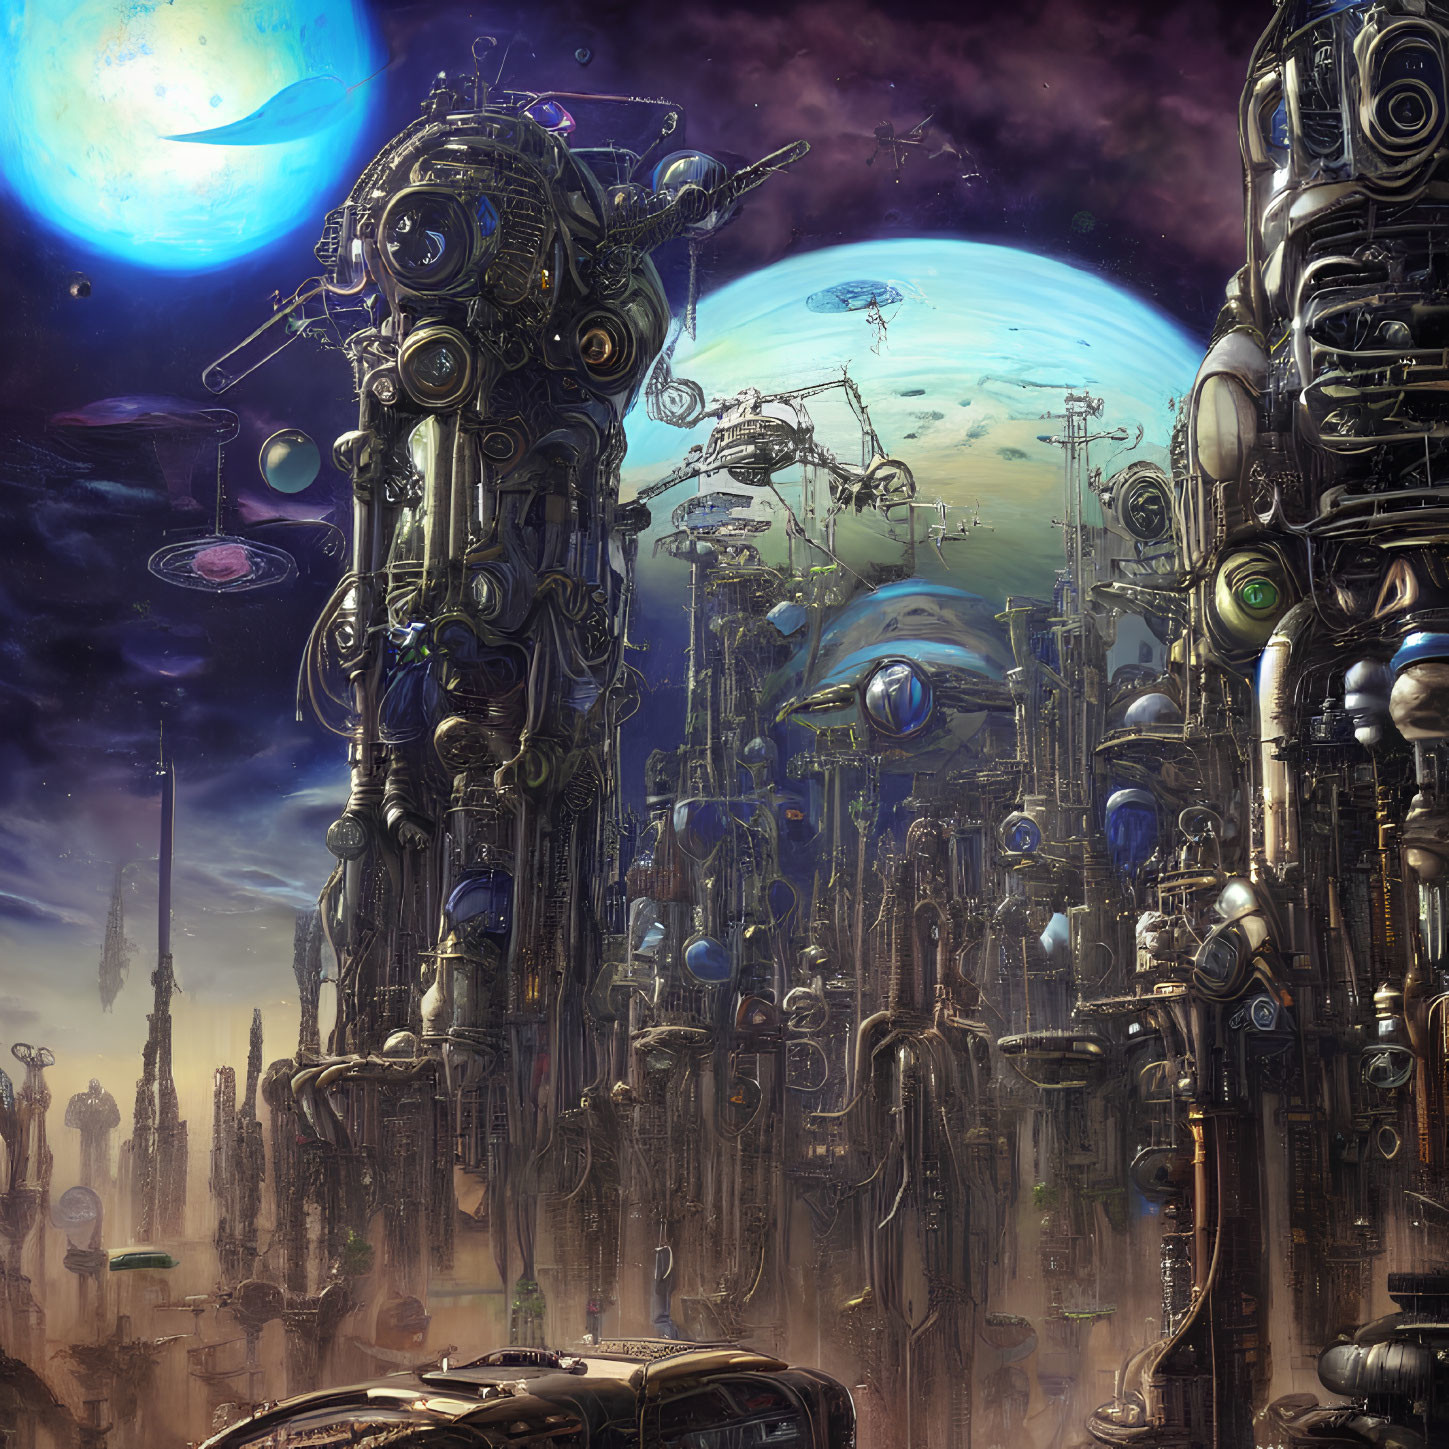 Futuristic cityscape with robotic structures and spacecraft under dual celestial bodies